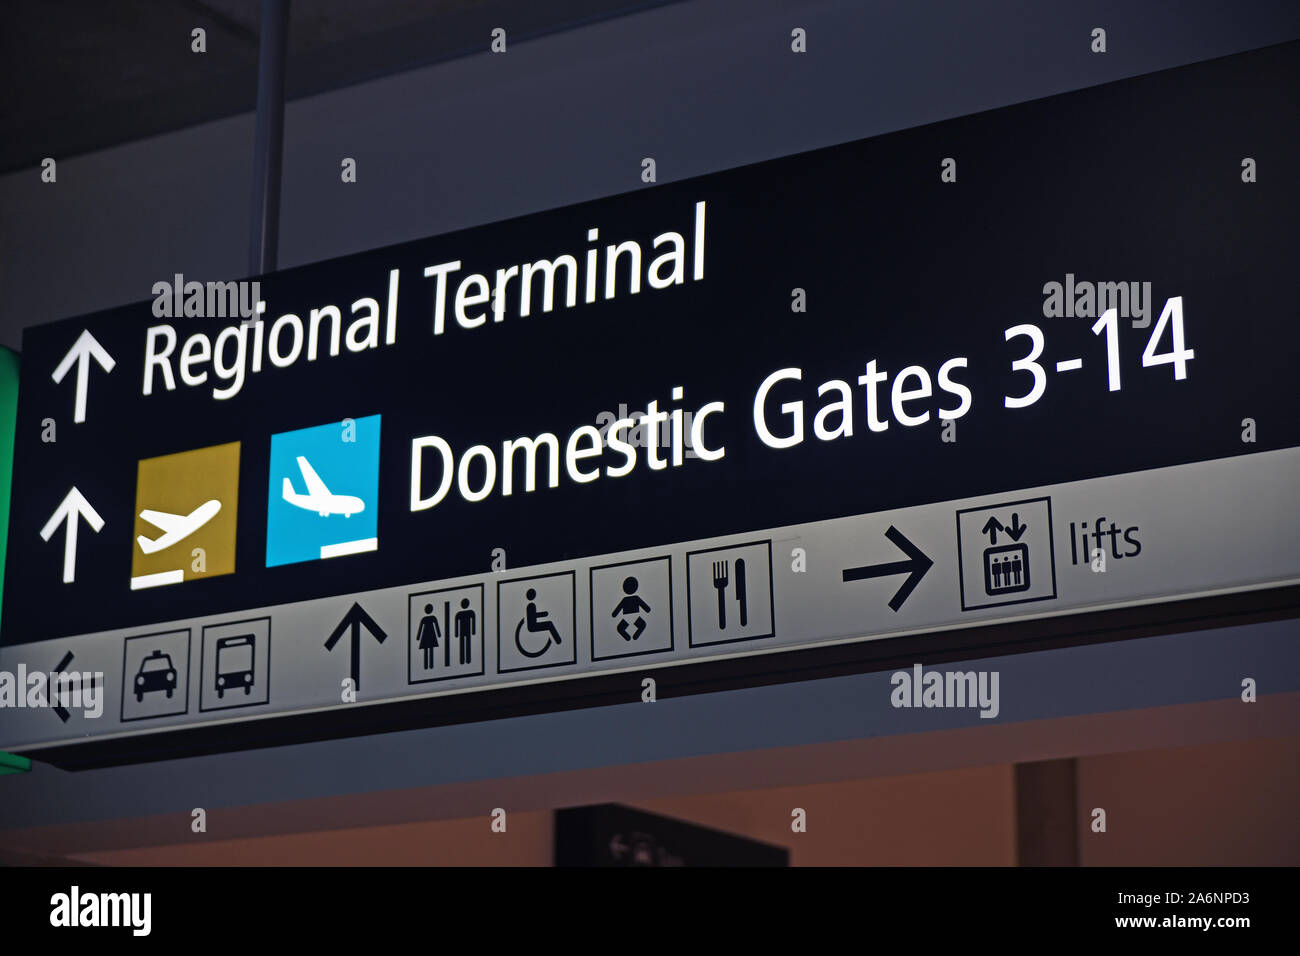 airport signage directing passengers on regional and domestic flights Stock Photo